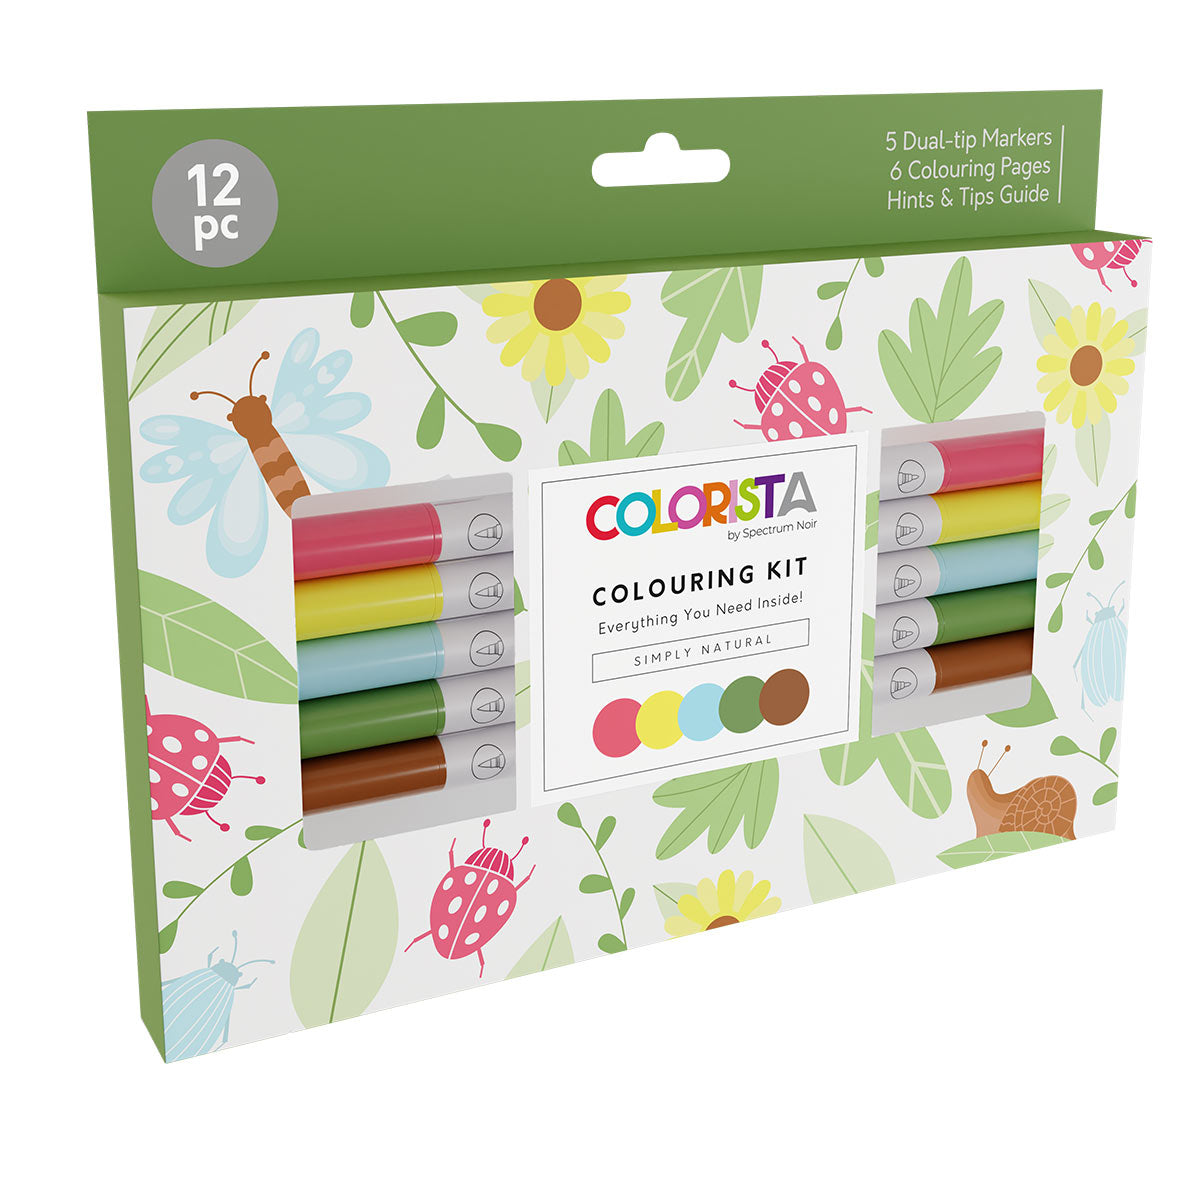 Spectrum Noir Colorista - Colouring Kit - Dual-tip Alcohol Brush Markers  - Simply Natural